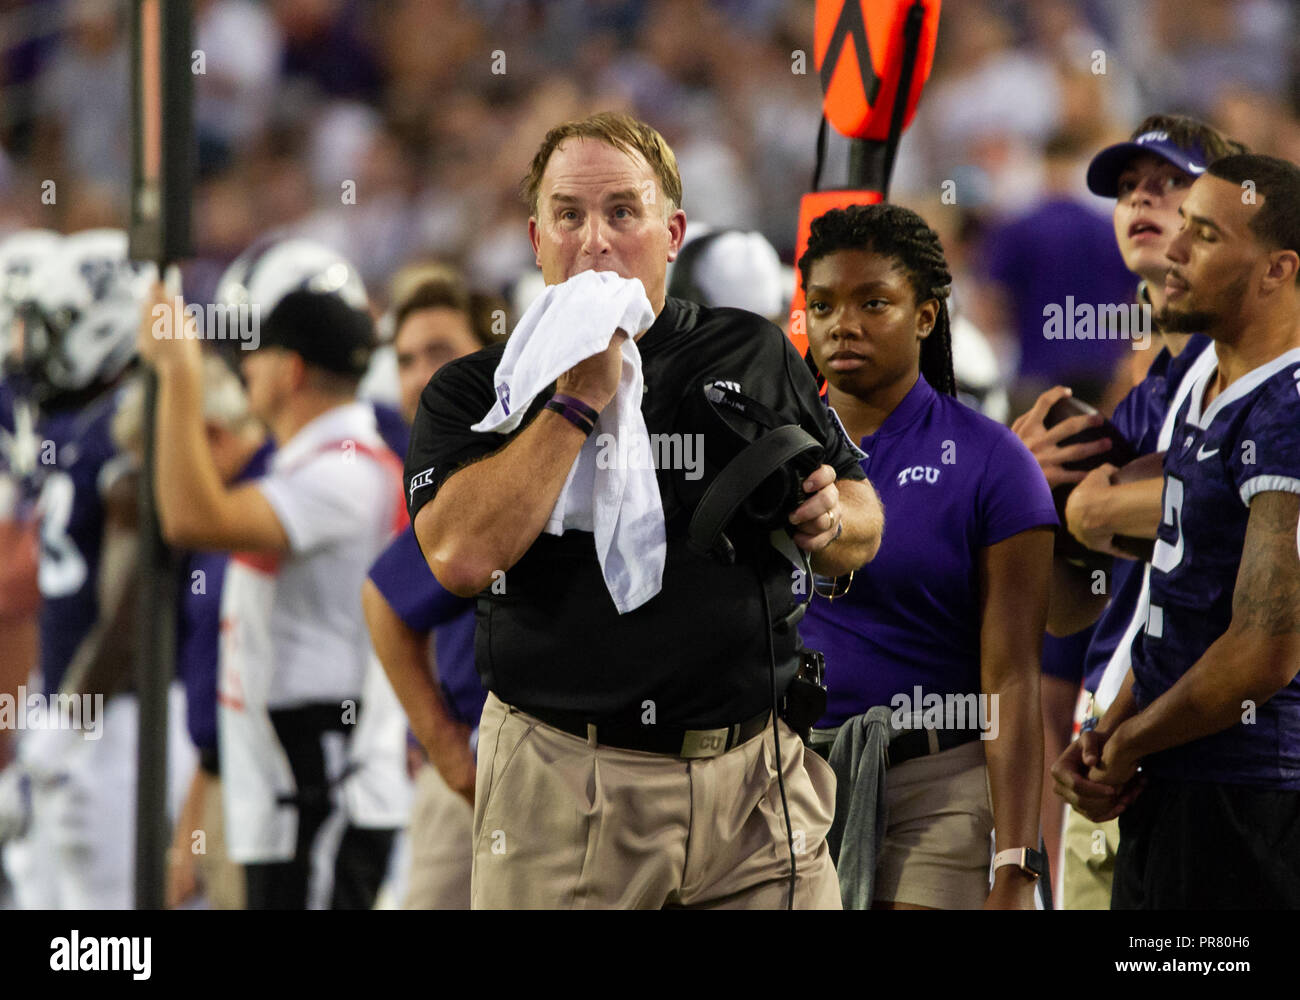 waco-texas-usa-29th-sep-2018-tcu-horned-frogs-head-coach-gary-patterson-wipes-sweat-off-his-face-during-the-1st-half-of-the-ncaa-football-game-between-the-iowa-state-cyclones-and-the-tcu-horned-frogs-at-amon-g-carter-in-waco-texas-matthew-lynchcsmalamy-live-news-PR80H6.jpg